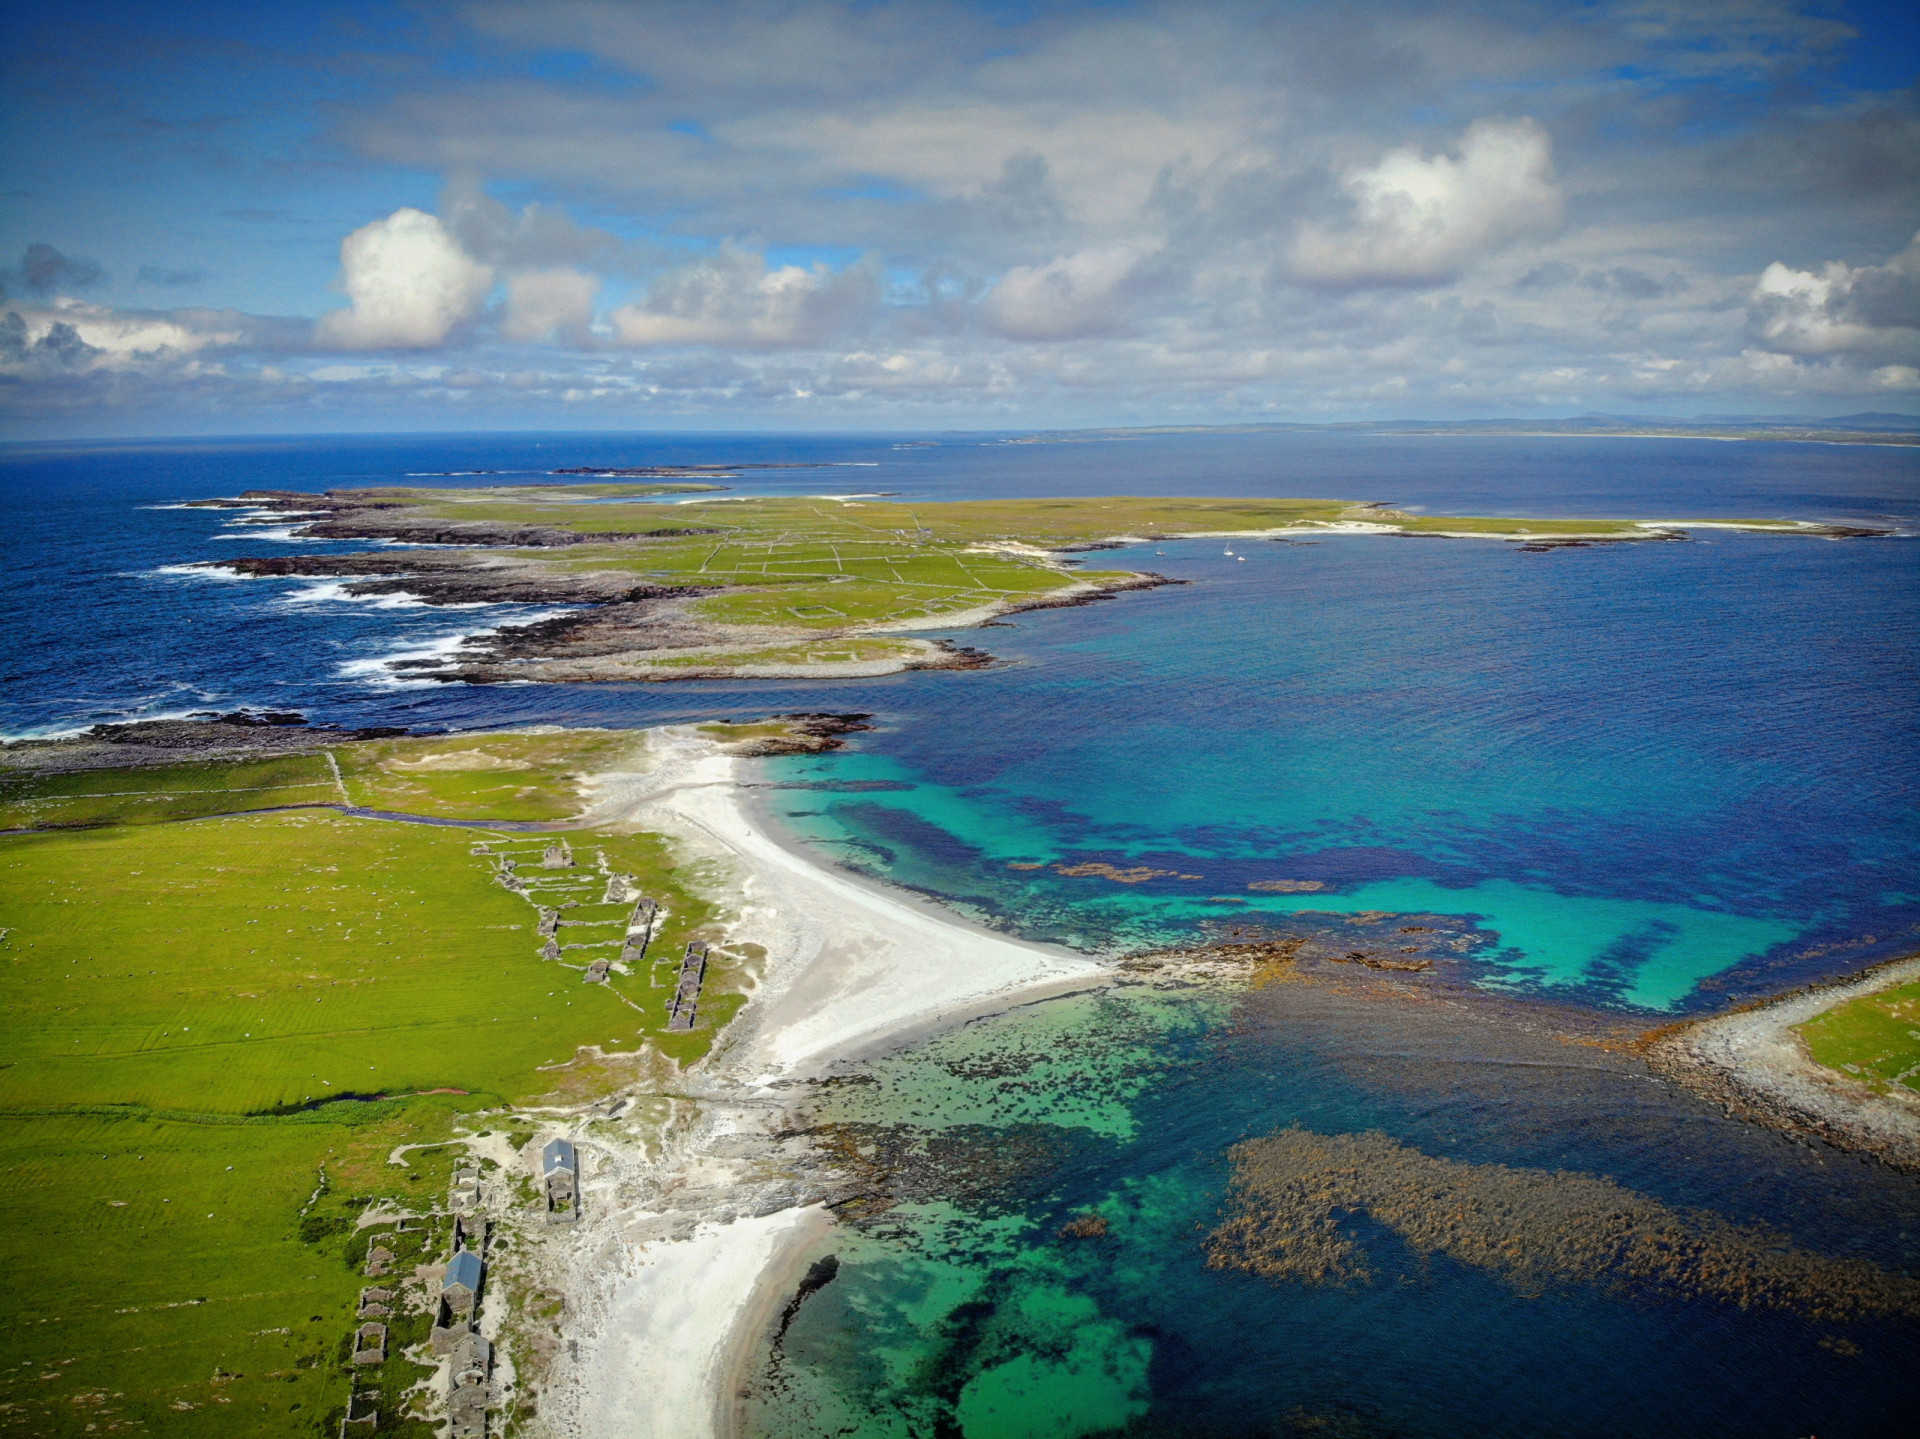 <p>The low-lying Inishkea islands lie off the coast of Belmullet, Co. Mayo. Home to a variety of bird species, seals, rabbits, sheep, and donkeys, the islands were last inhabited by people in the 1930s.</p><p><a href="https://www.msn.com/en-au/community/channel/vid-7xx8mnucu55yw63we9va2gwr7uihbxwc68fxqp25x6tg4ftibpra?cvid=94631541bc0f4f89bfd59158d696ad7e">Follow us and access great exclusive content every day</a></p>